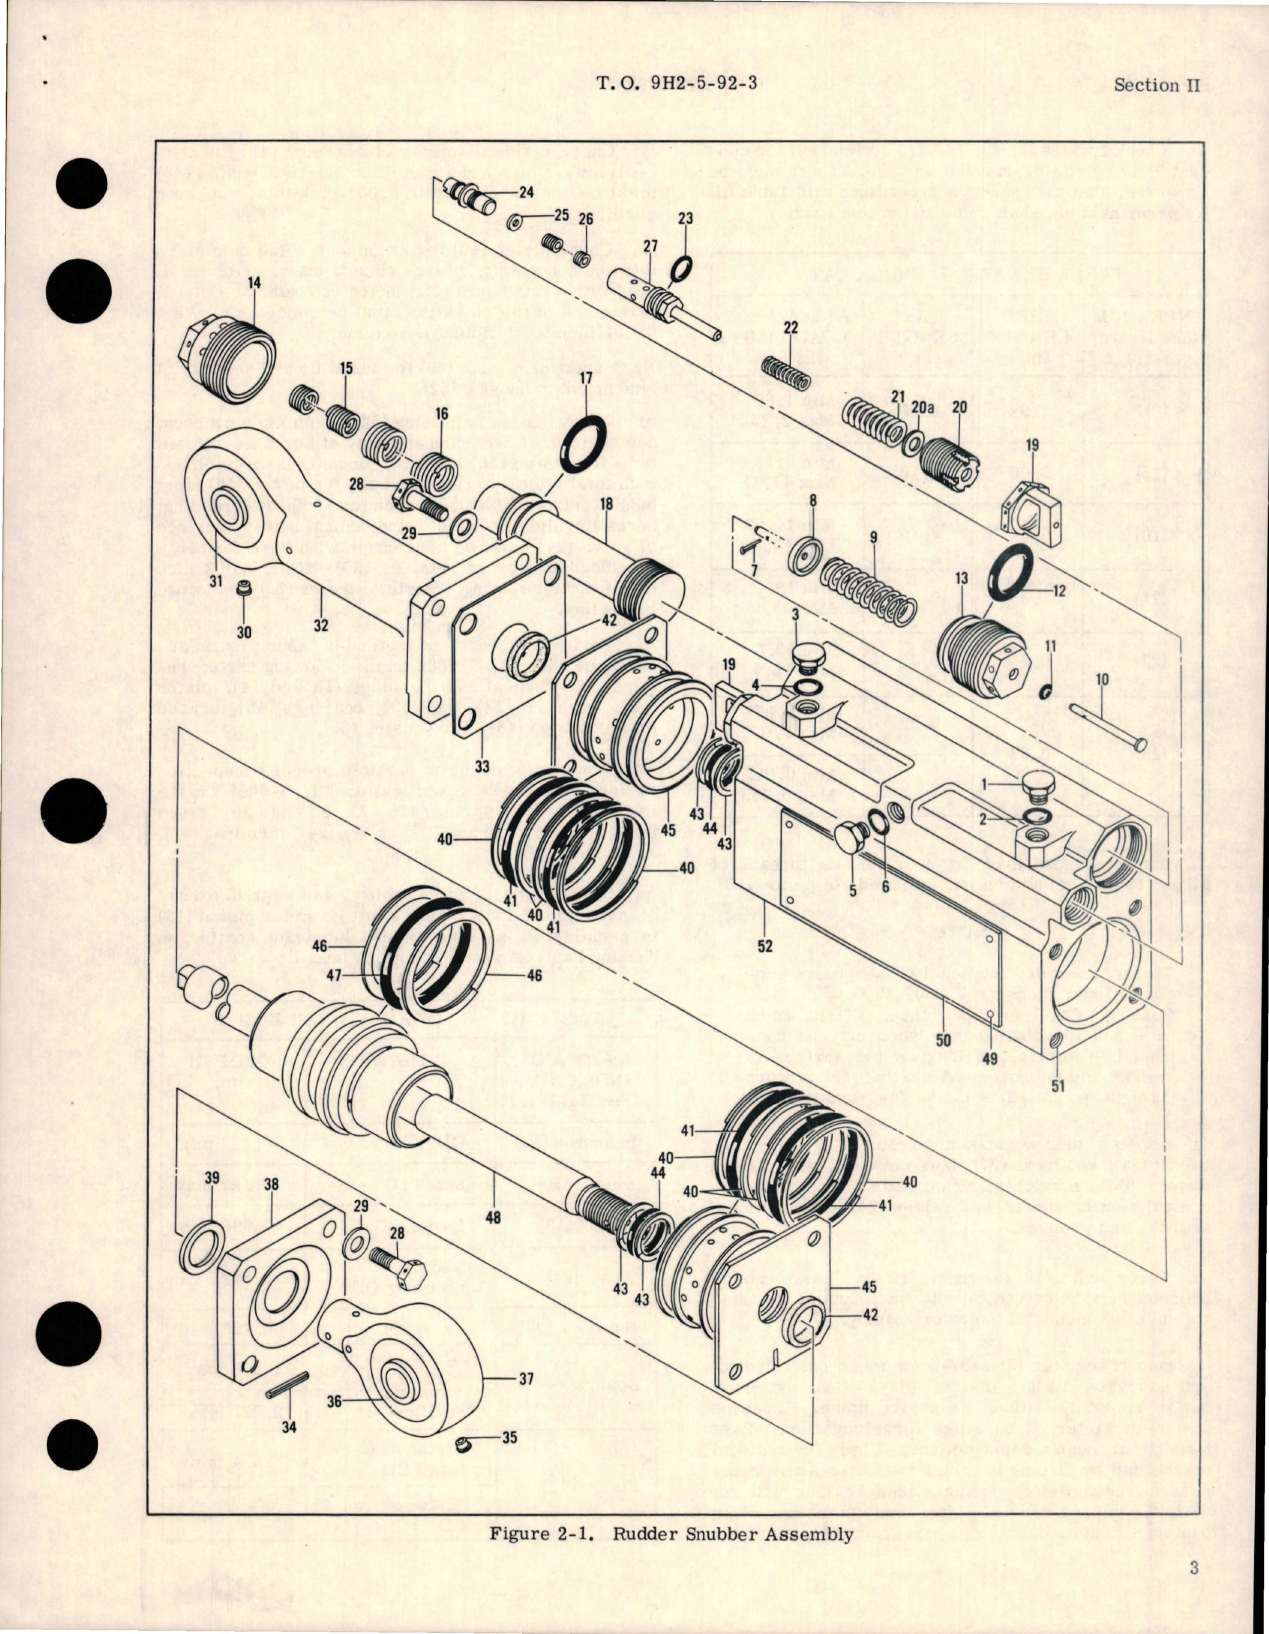 Sample page 5 from AirCorps Library document: Overhaul Instructions for Rudder Snubber Assembly - Part 5-98347-2, 5-98347-3, and 5-98347-4 